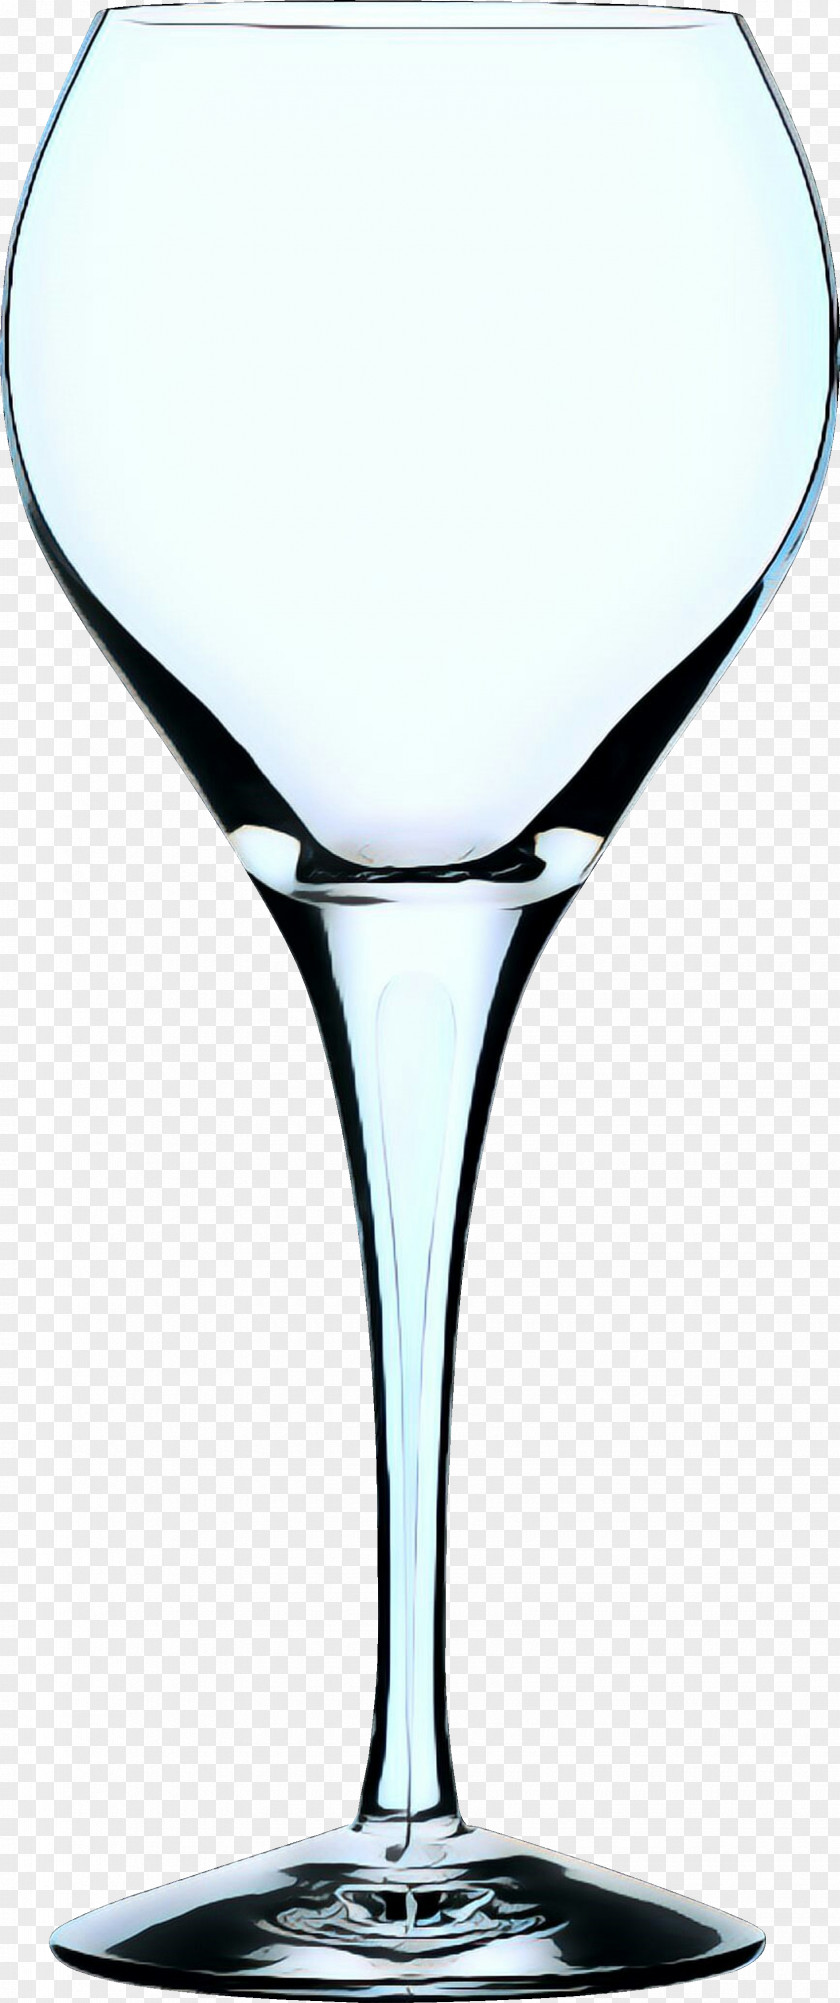 Tableware Martini Glass Champagne Glasses Background PNG